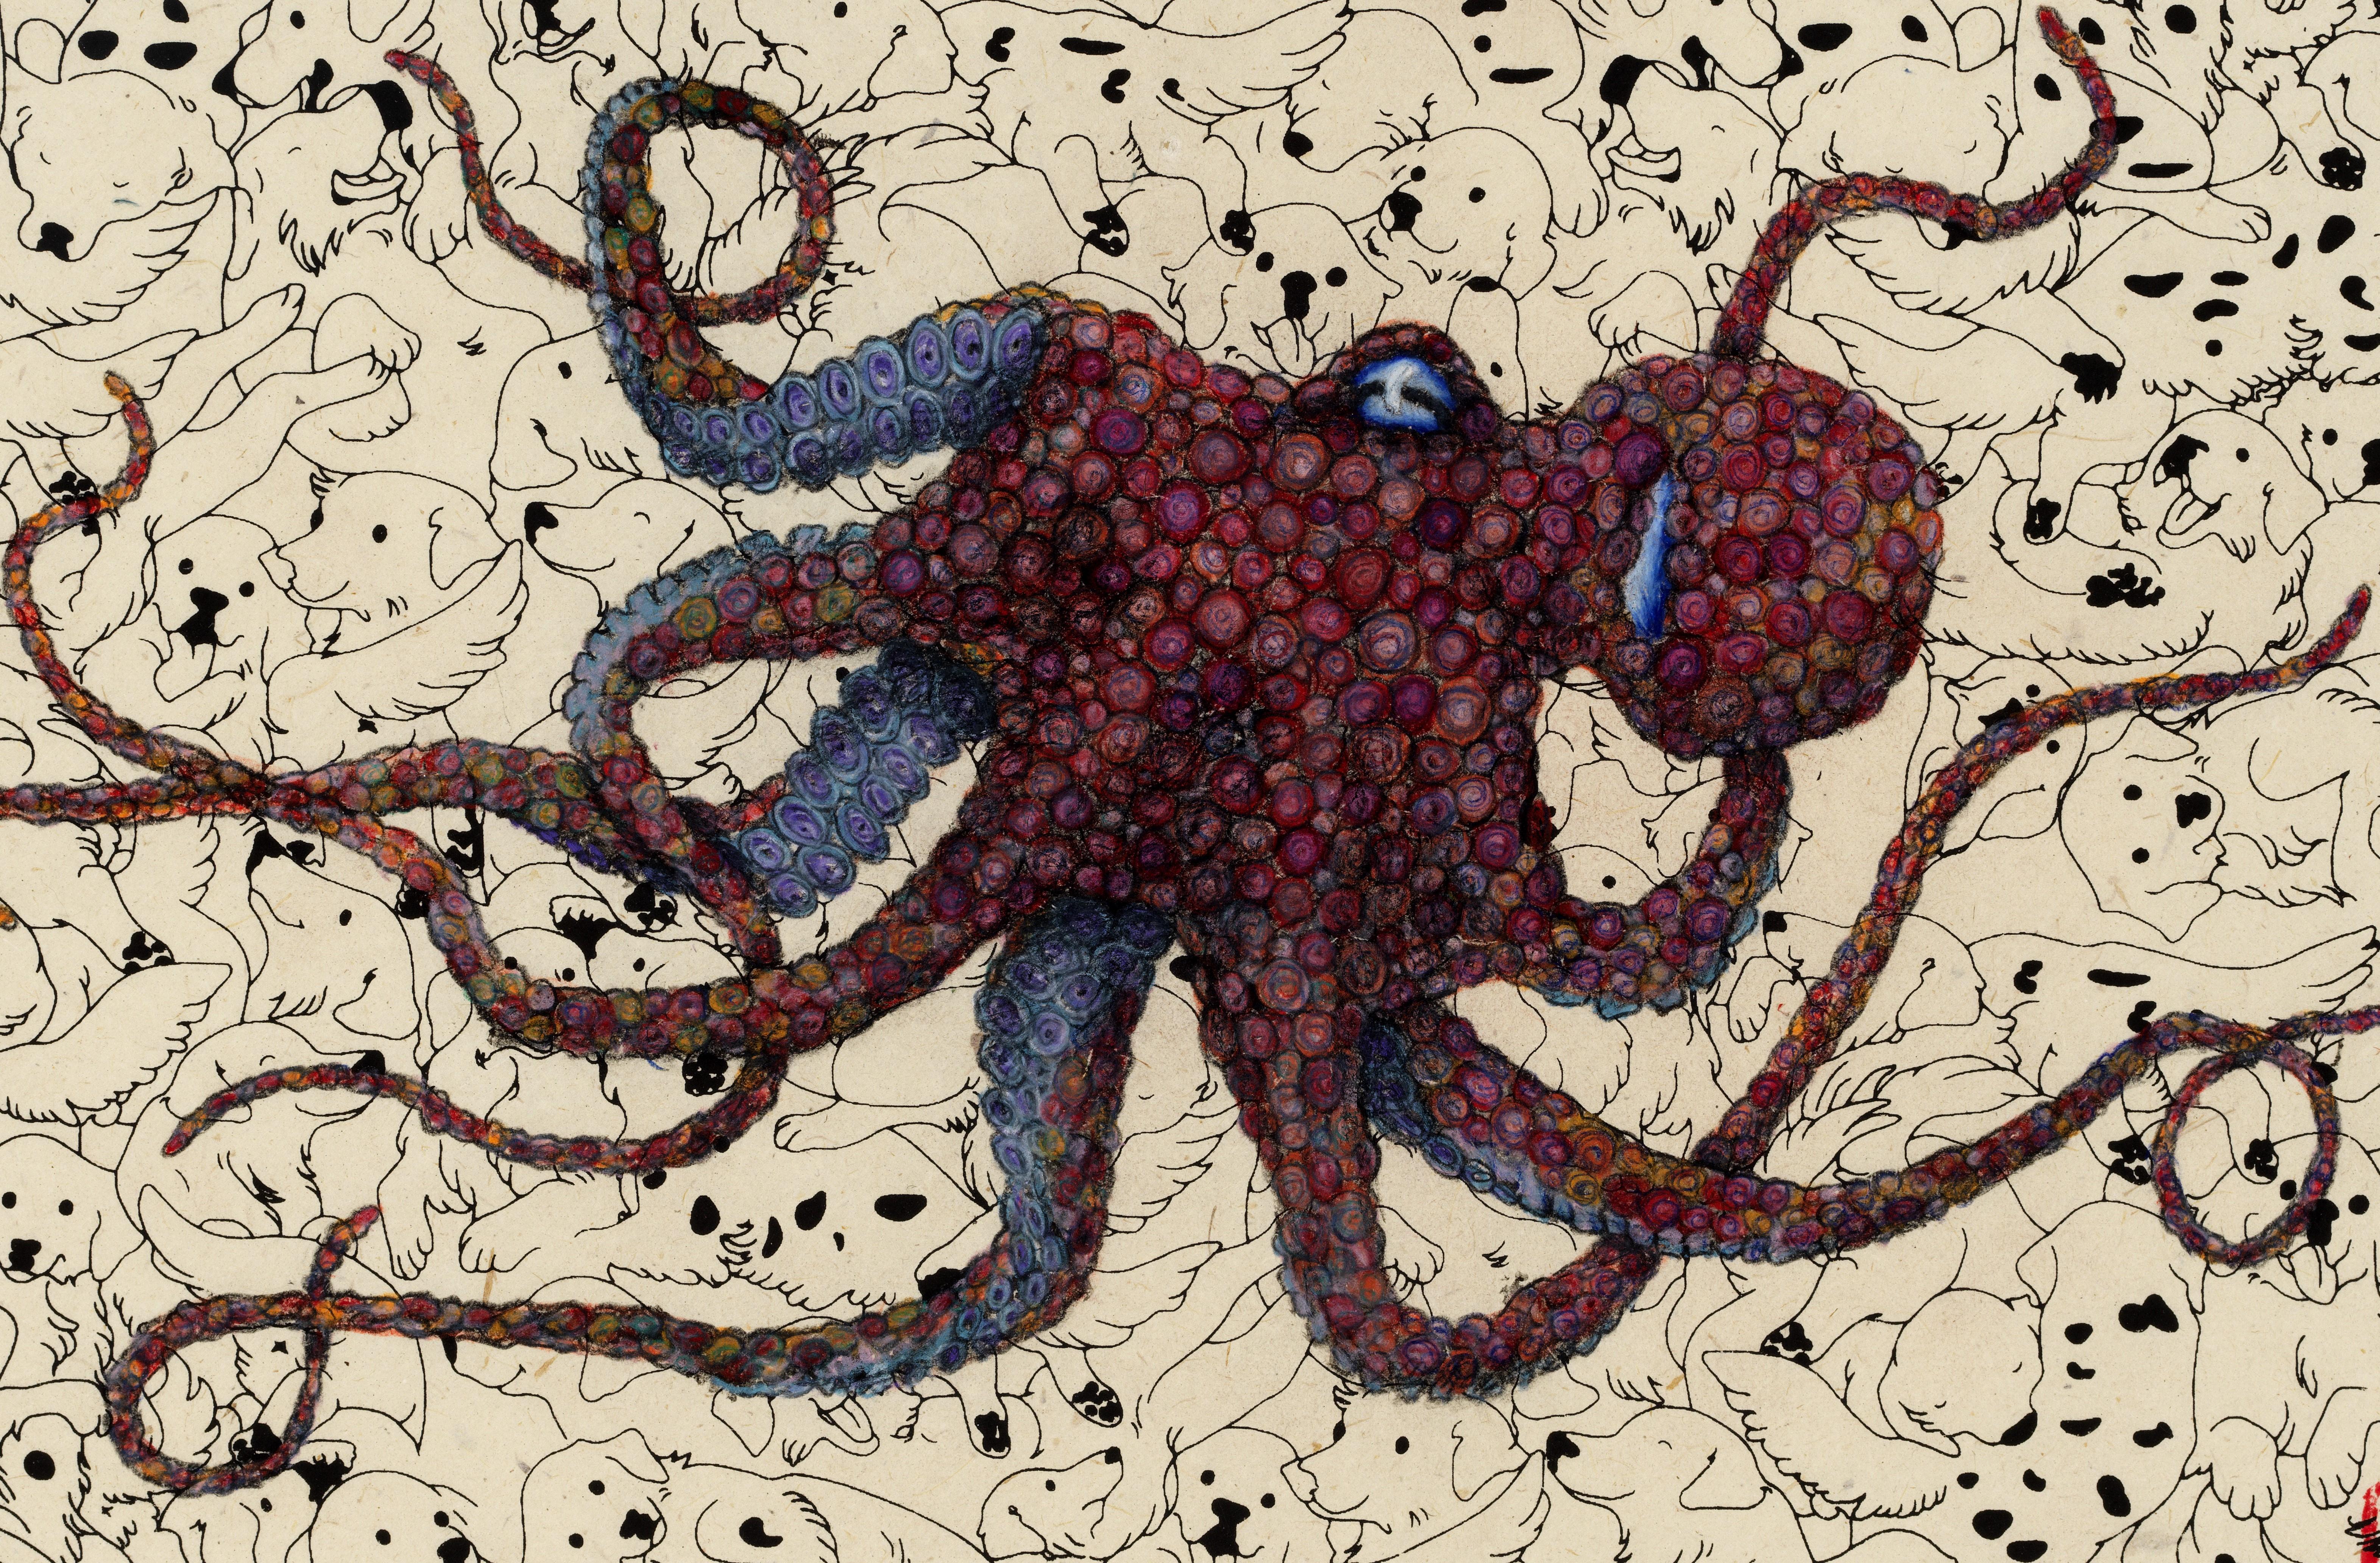 Puppypus - Tobasco - Gyotaku Style Sumi Ink Painting of an Octopus - Art by Jeff Conroy